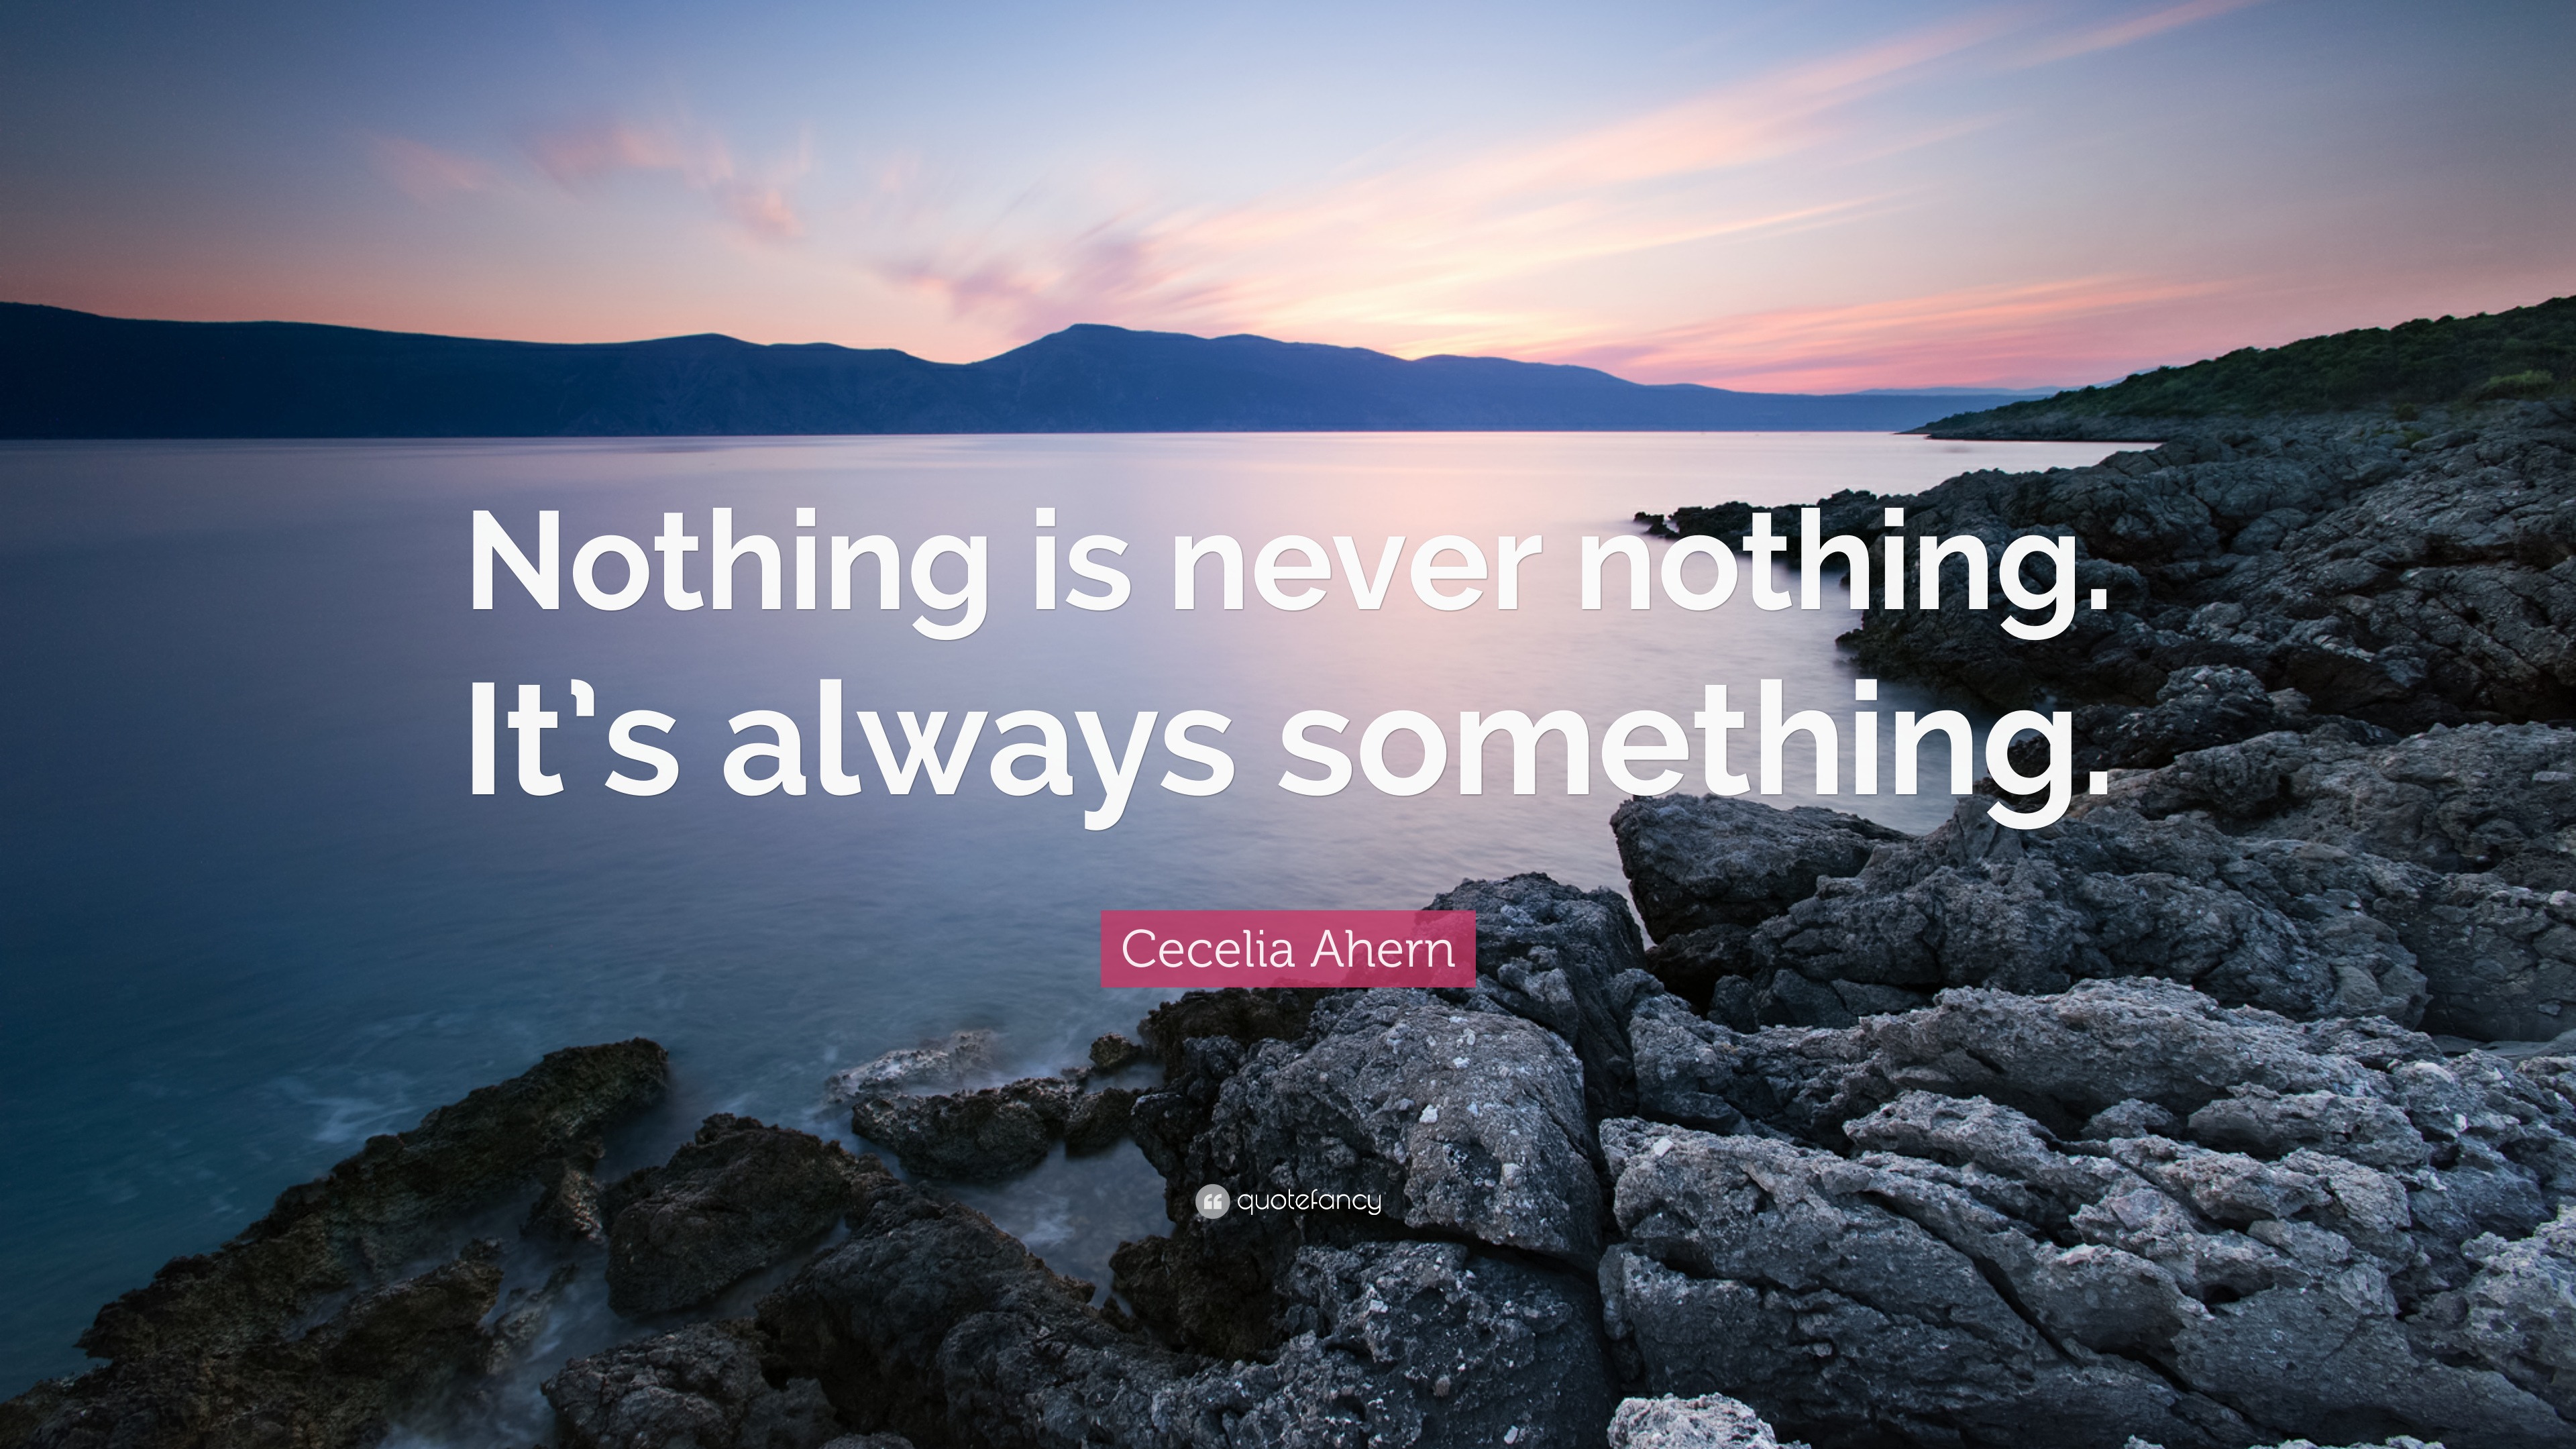 Cecelia Ahern Quote: “Nothing is never nothing. It's always something.”